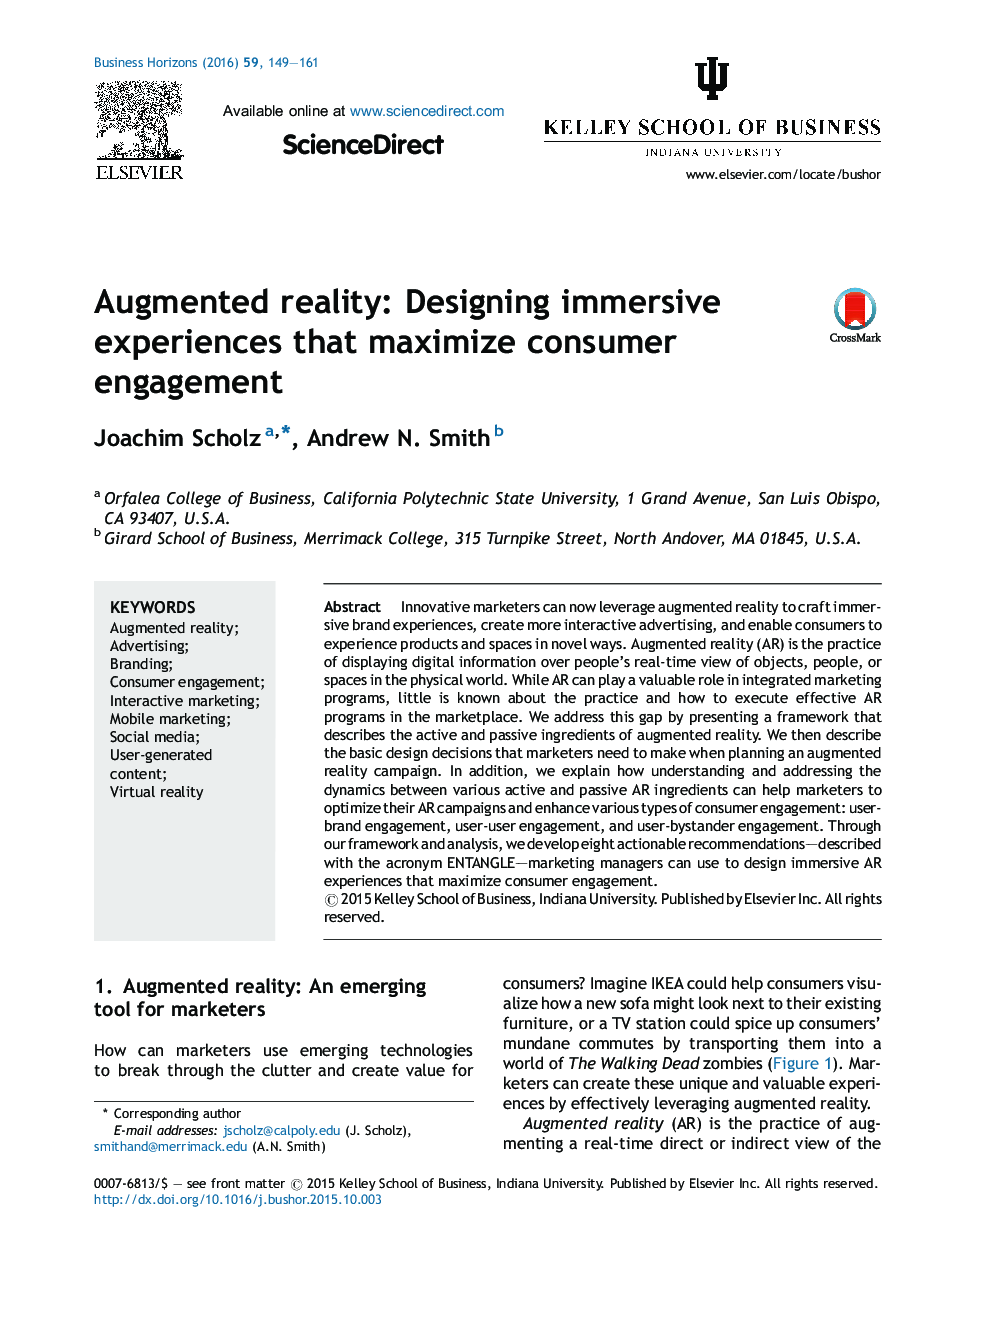 Augmented reality: Designing immersive experiences that maximize consumer engagement